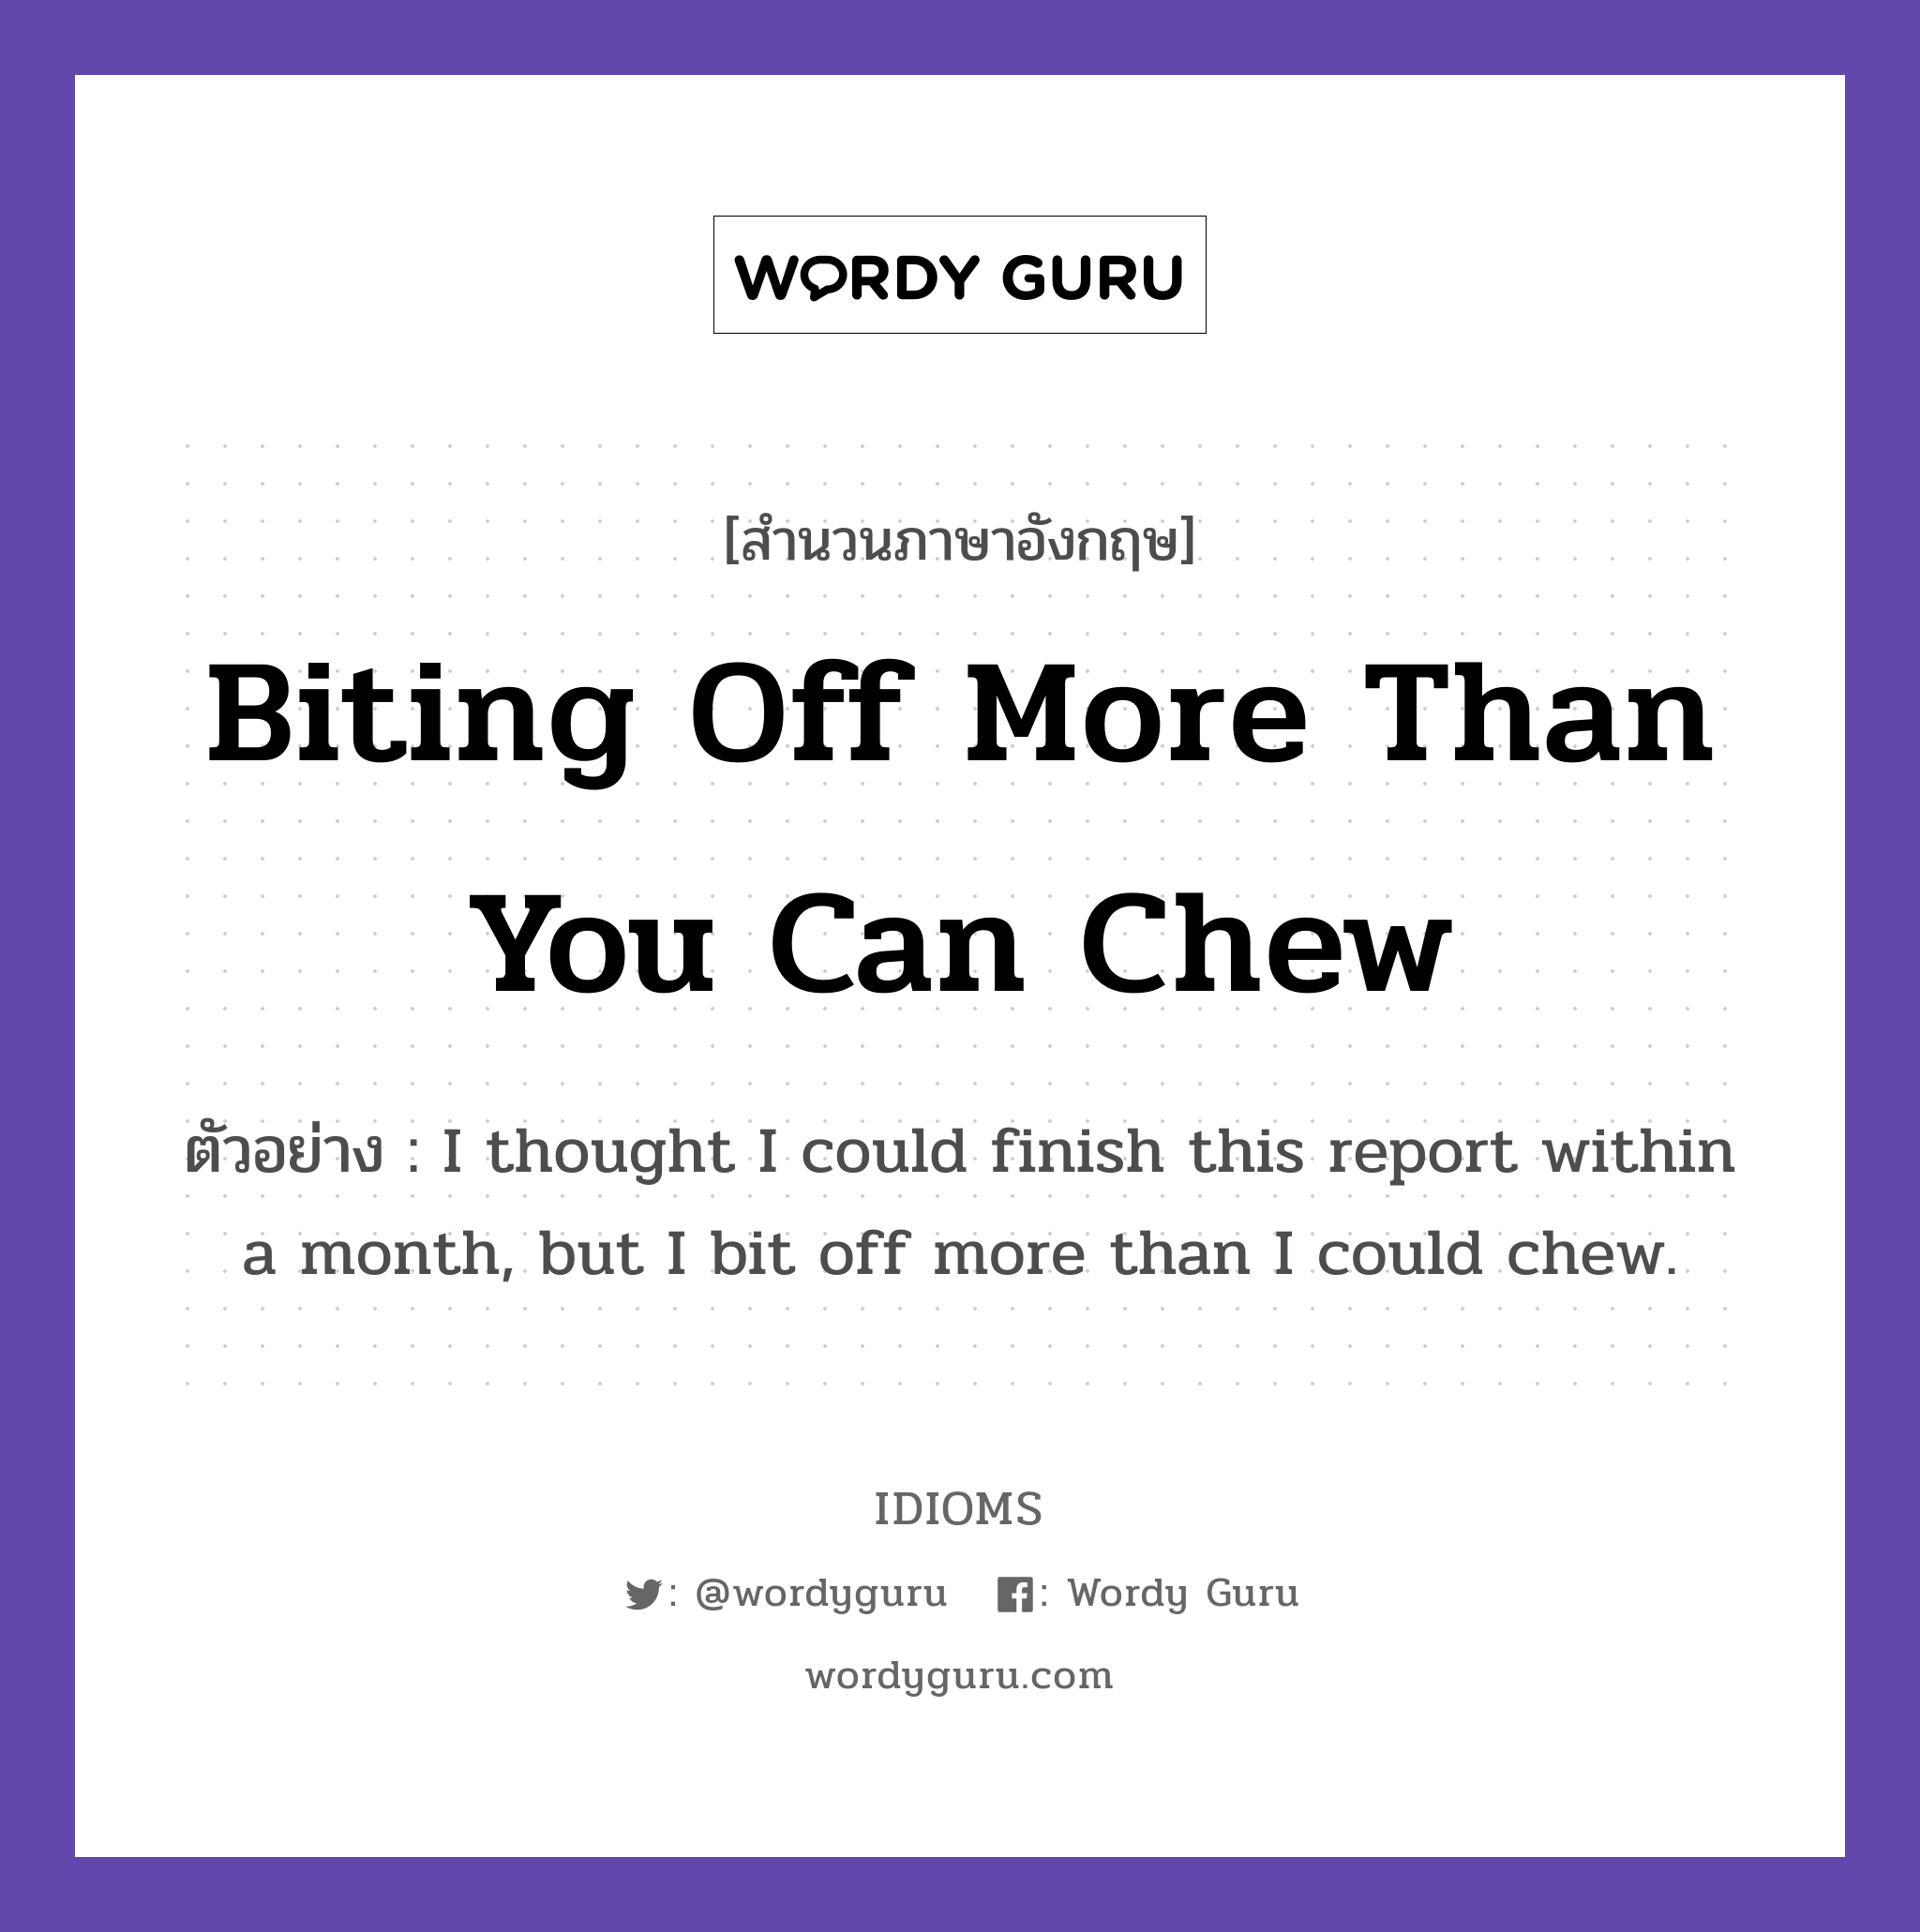 Biting Off More Than You Can Chew แปลว่า?, สำนวนภาษาอังกฤษ Biting Off More Than You Can Chew ตัวอย่าง I thought I could finish this report within a month, but I bit off more than I could chew.